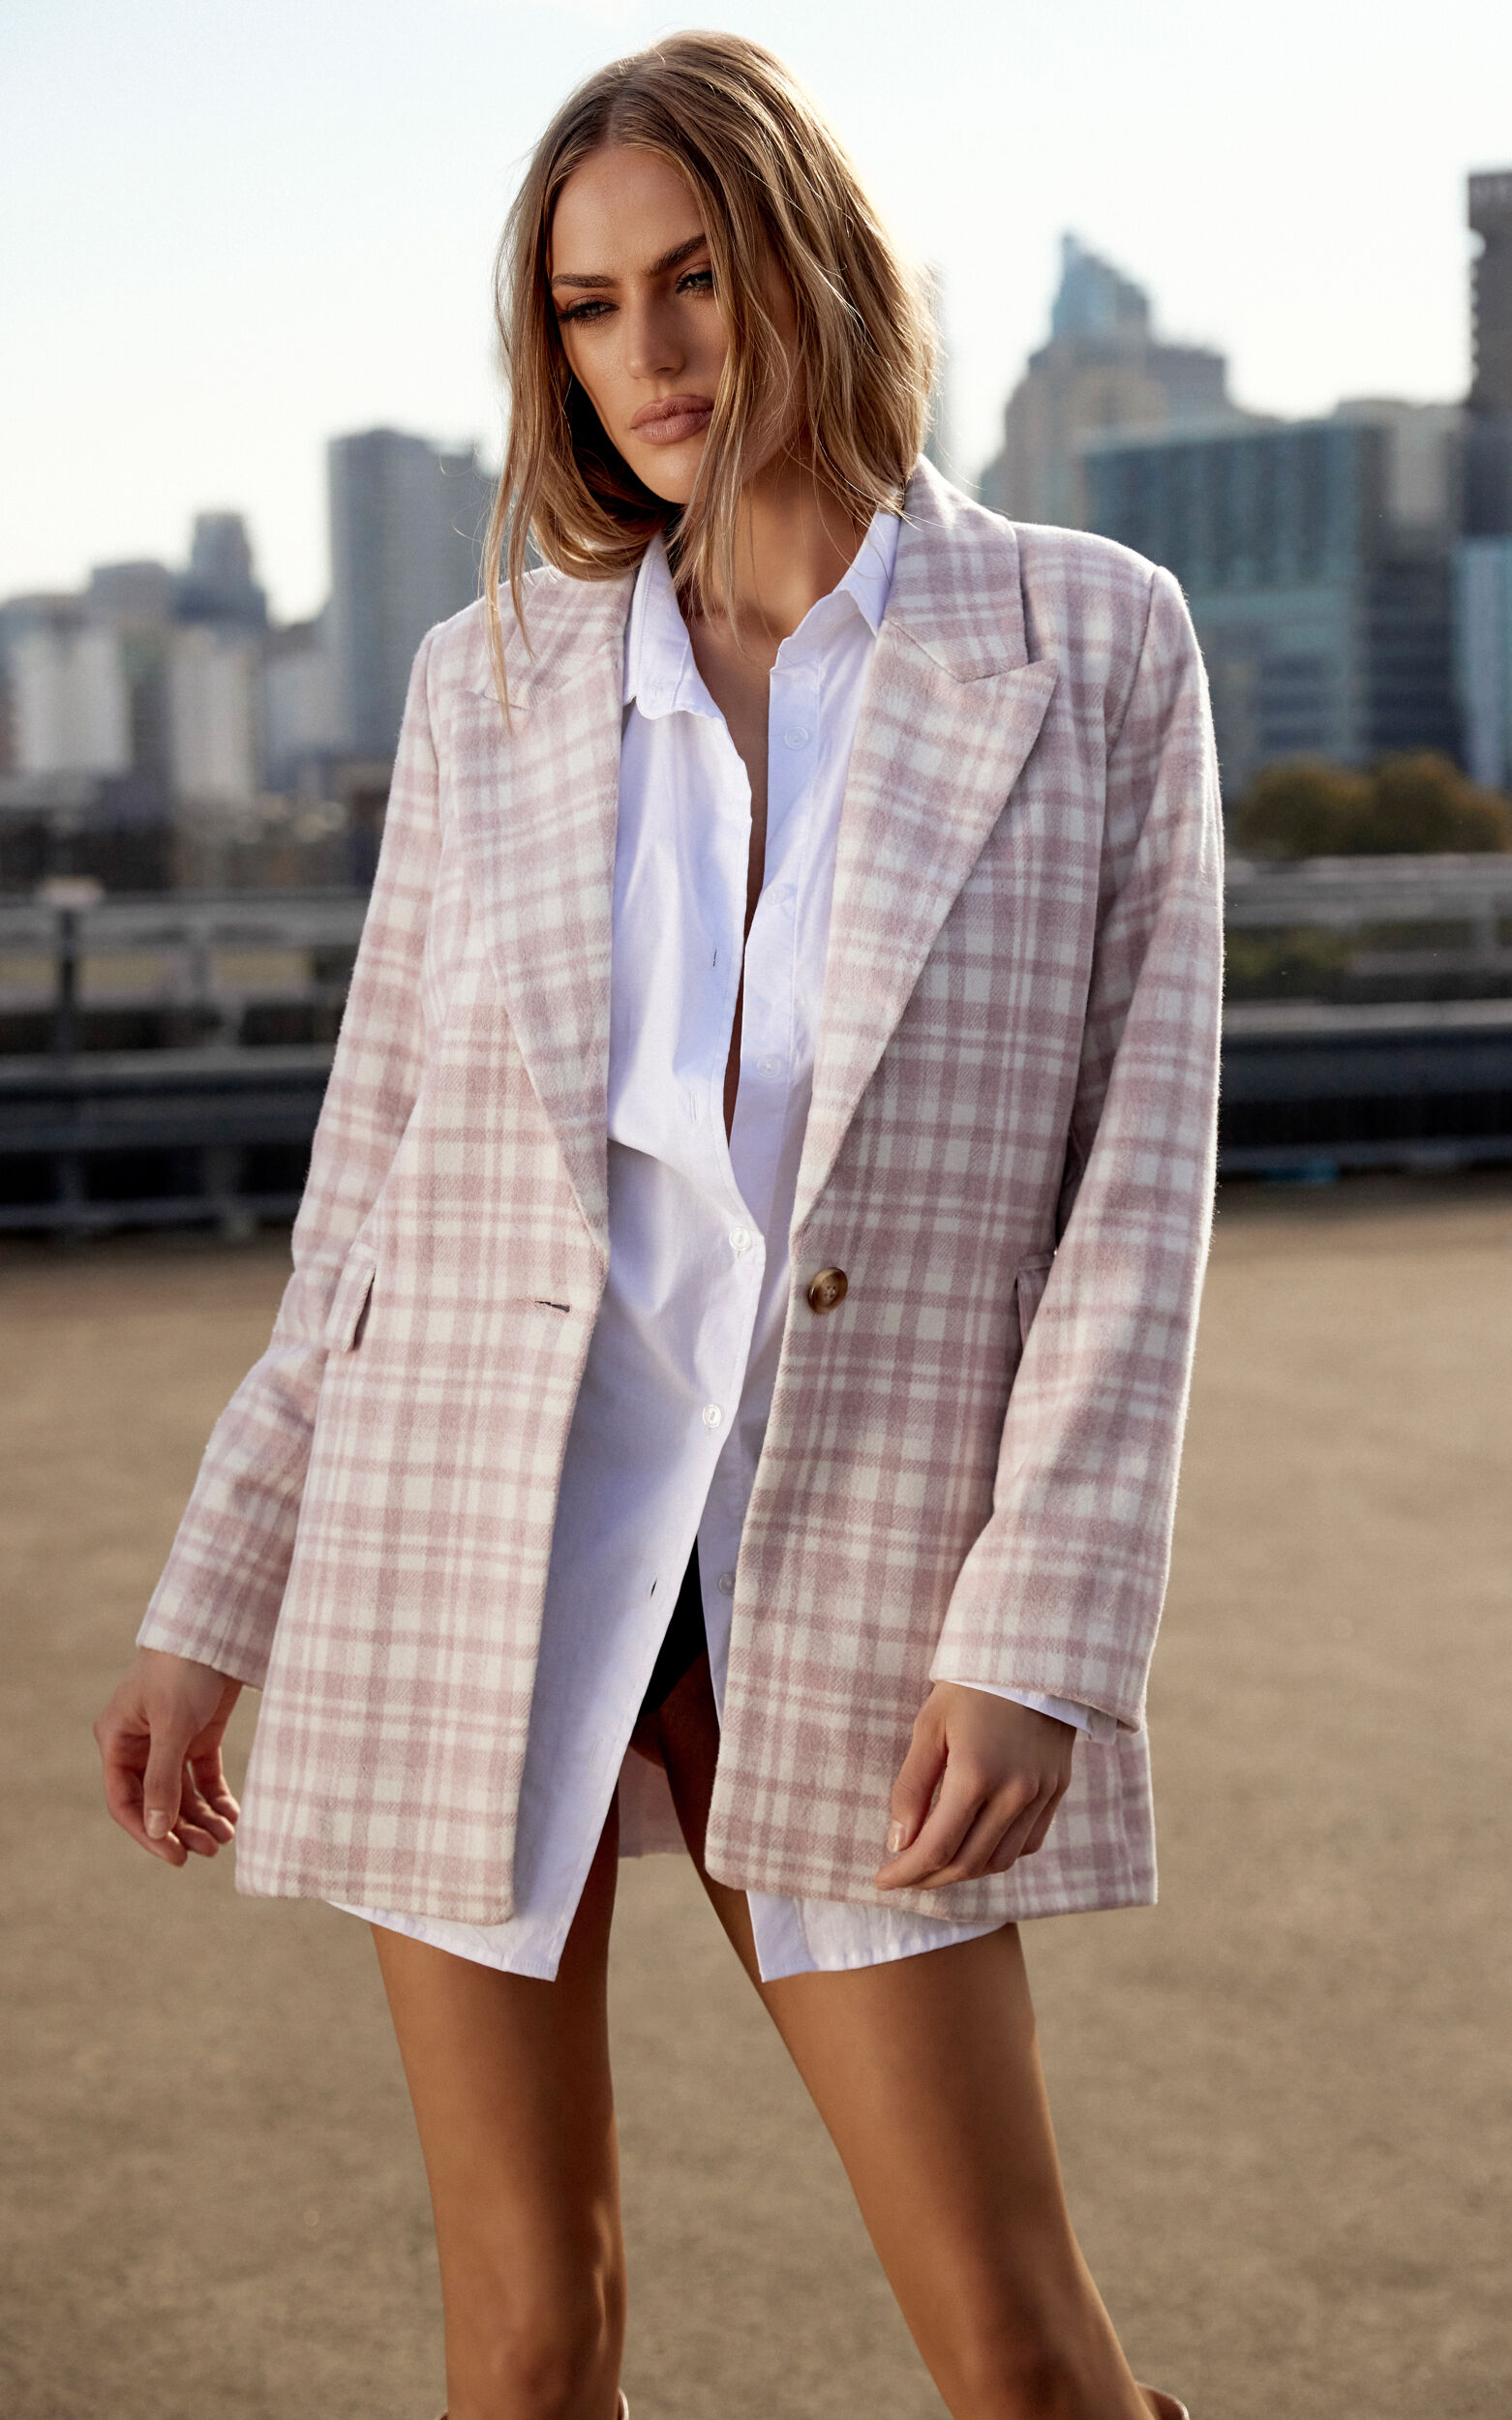 Aquiline Longline Tailored Blazer in Aquiline Clueless Check - 06, PNK1, super-hi-res image number null